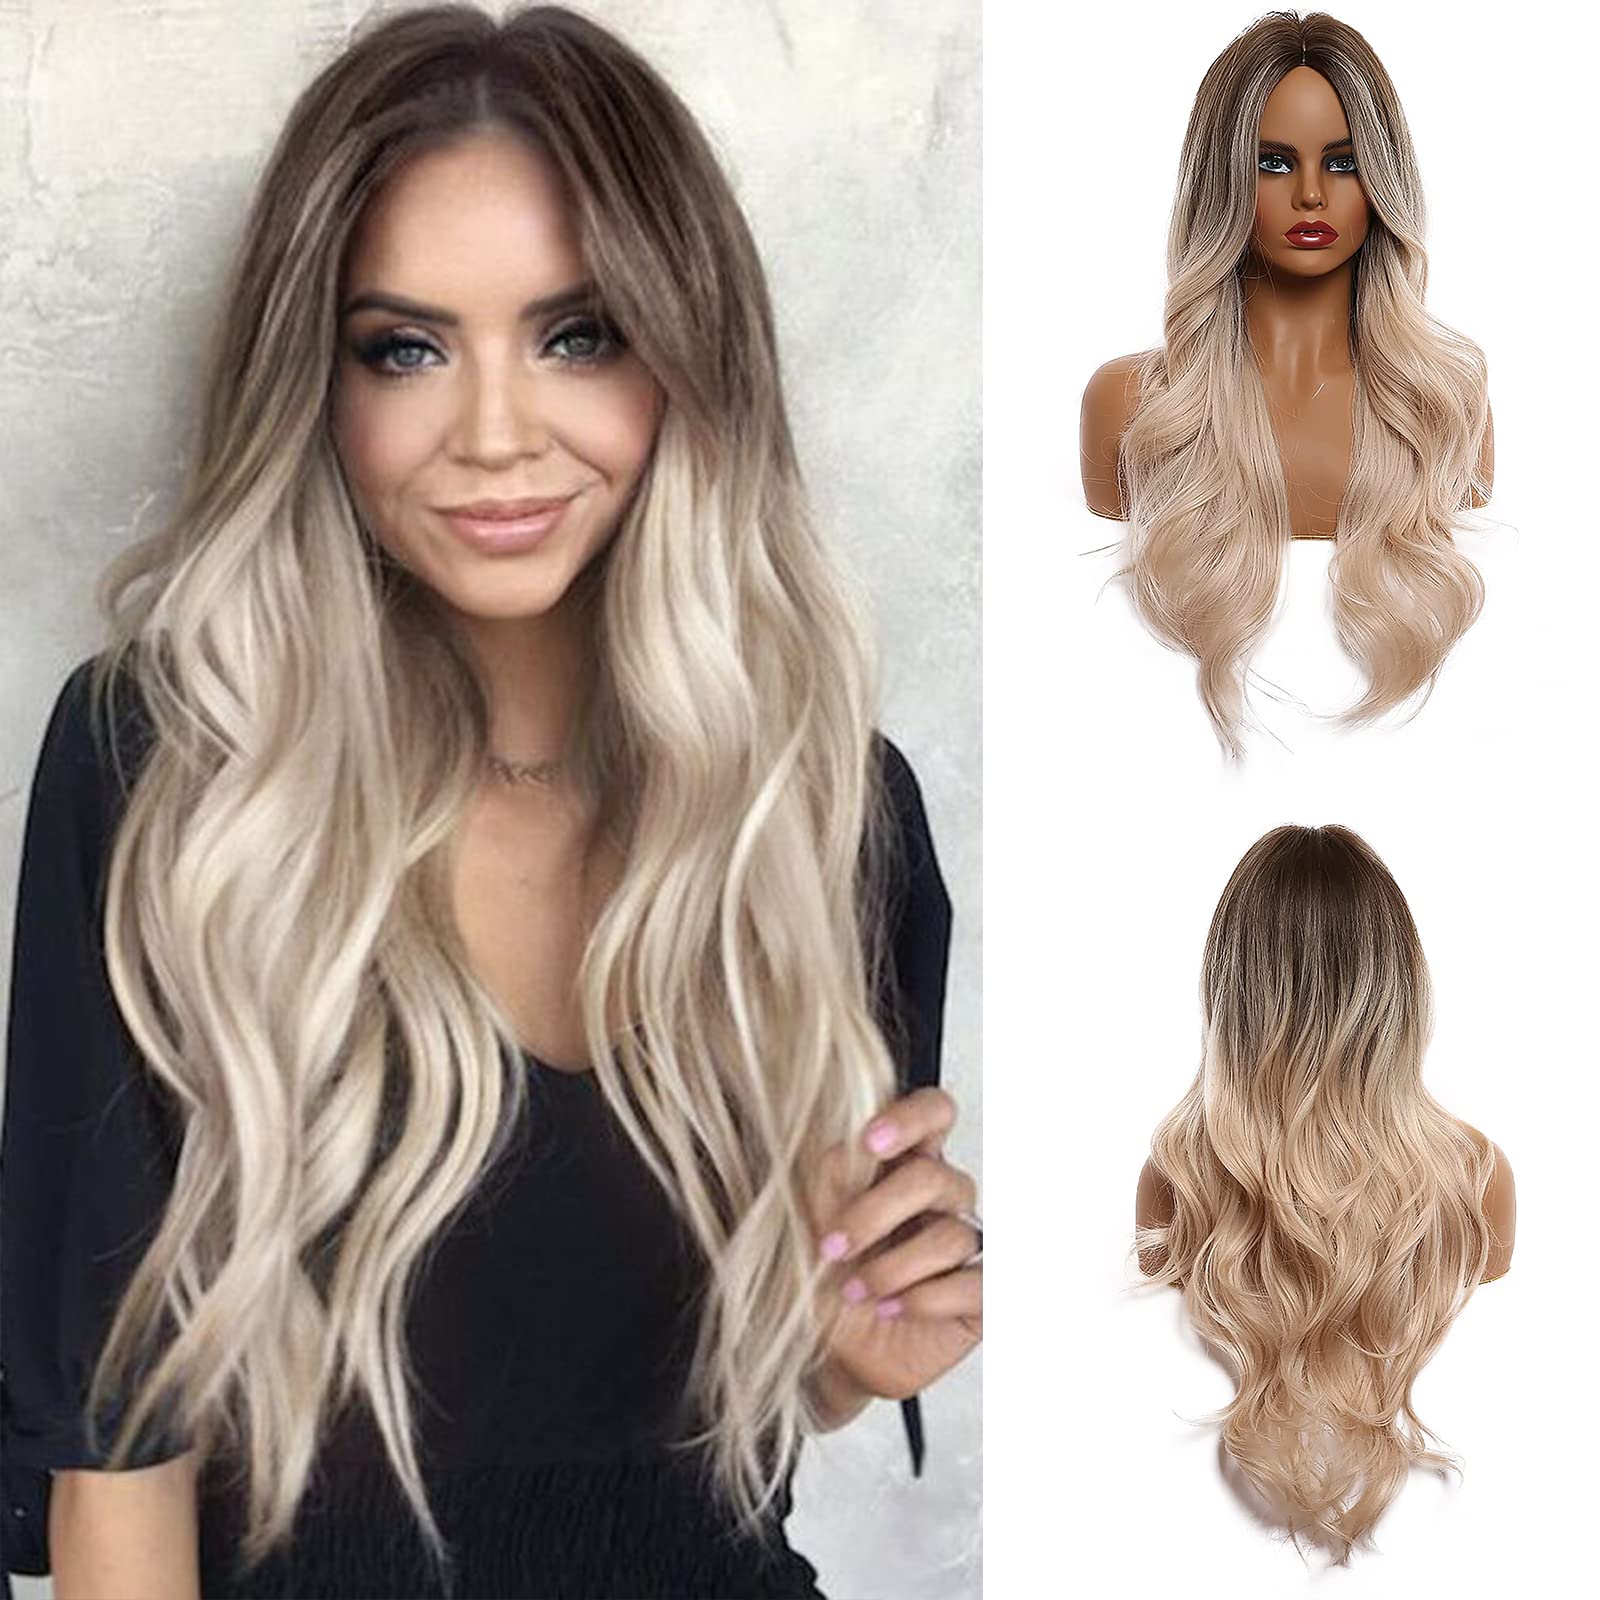 Esmee Long Ombre Brown Blonde Platinum High-Temperature Synthetic Wigs For Black Woman Water Wave Middle Part Cosplay Wig